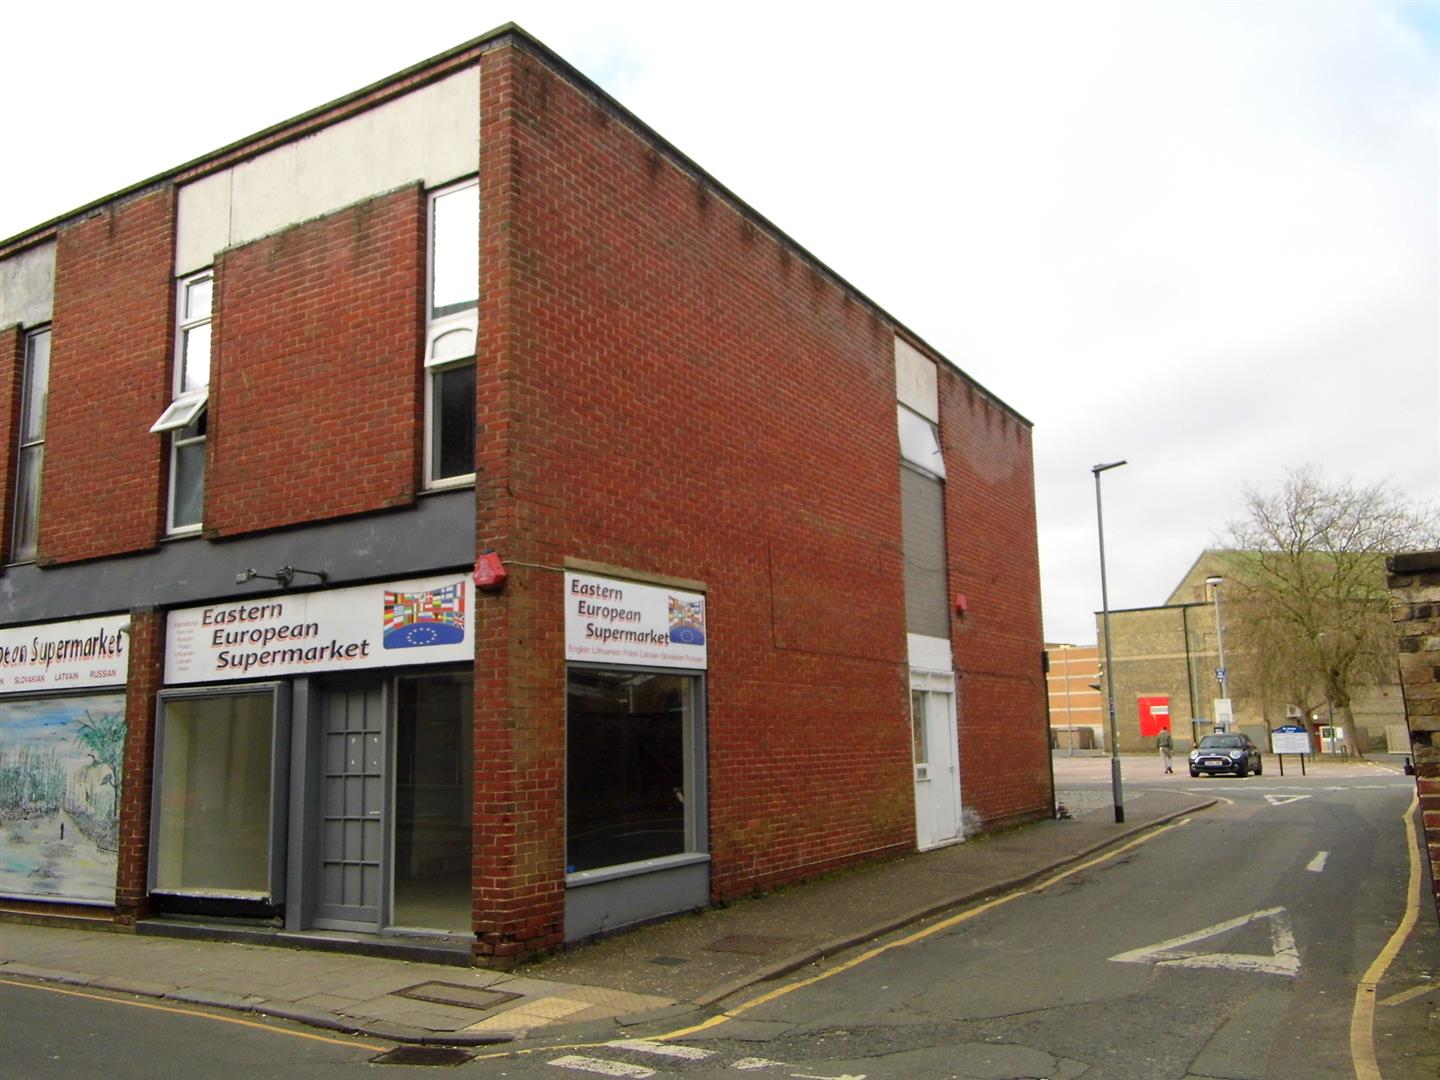 Commercial property to rent - Property Image 1